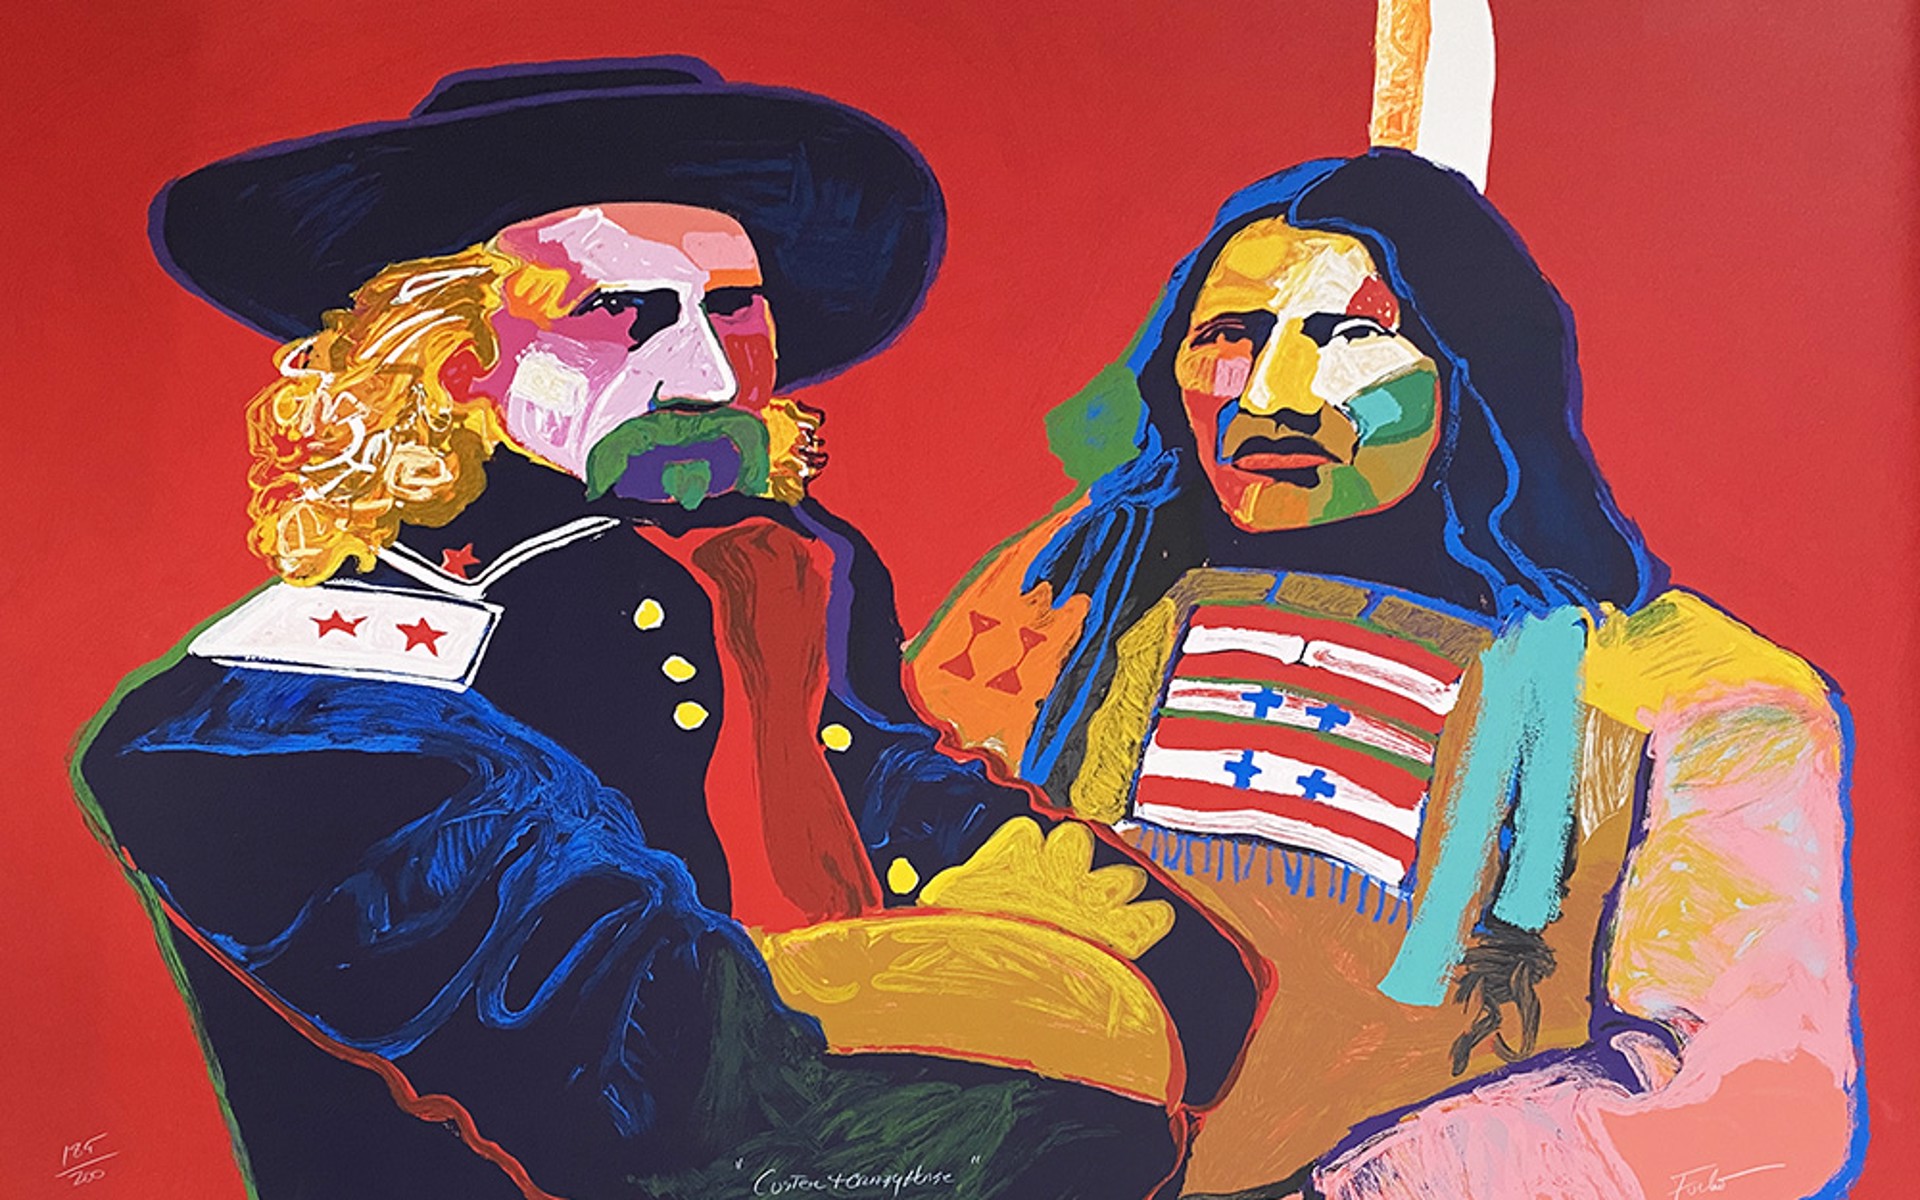 Custer and Crazy Horse by Malcolm Furlow